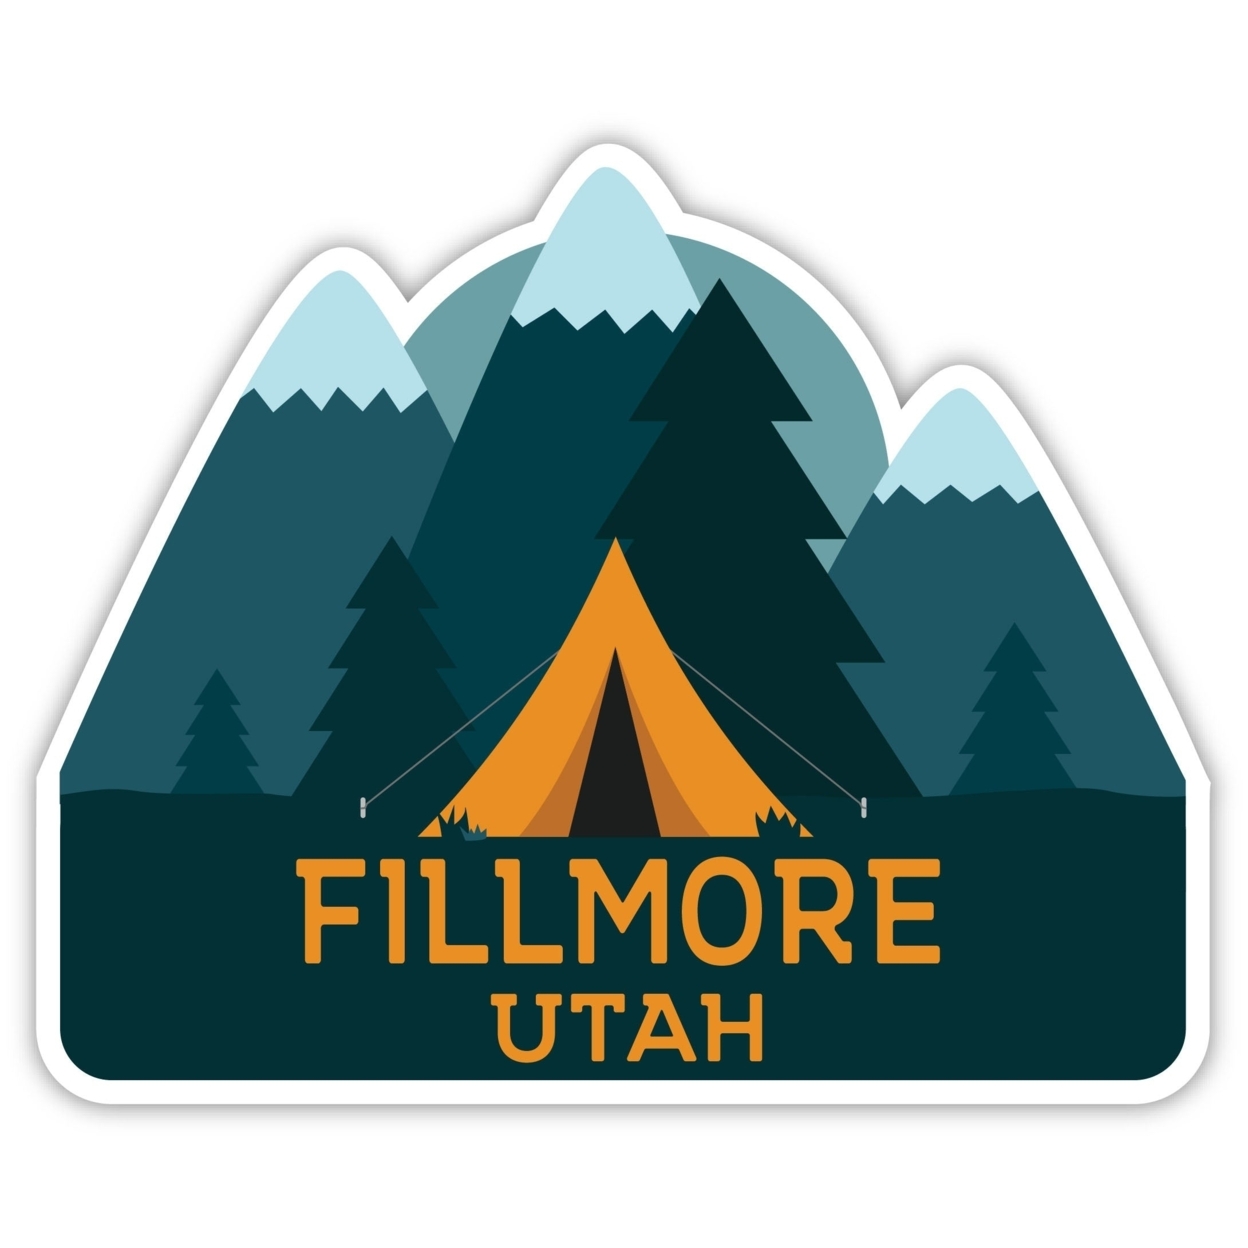 Fillmore Utah Souvenir Decorative Stickers (Choose Theme And Size) - 4-Pack, 2-Inch, Camp Life